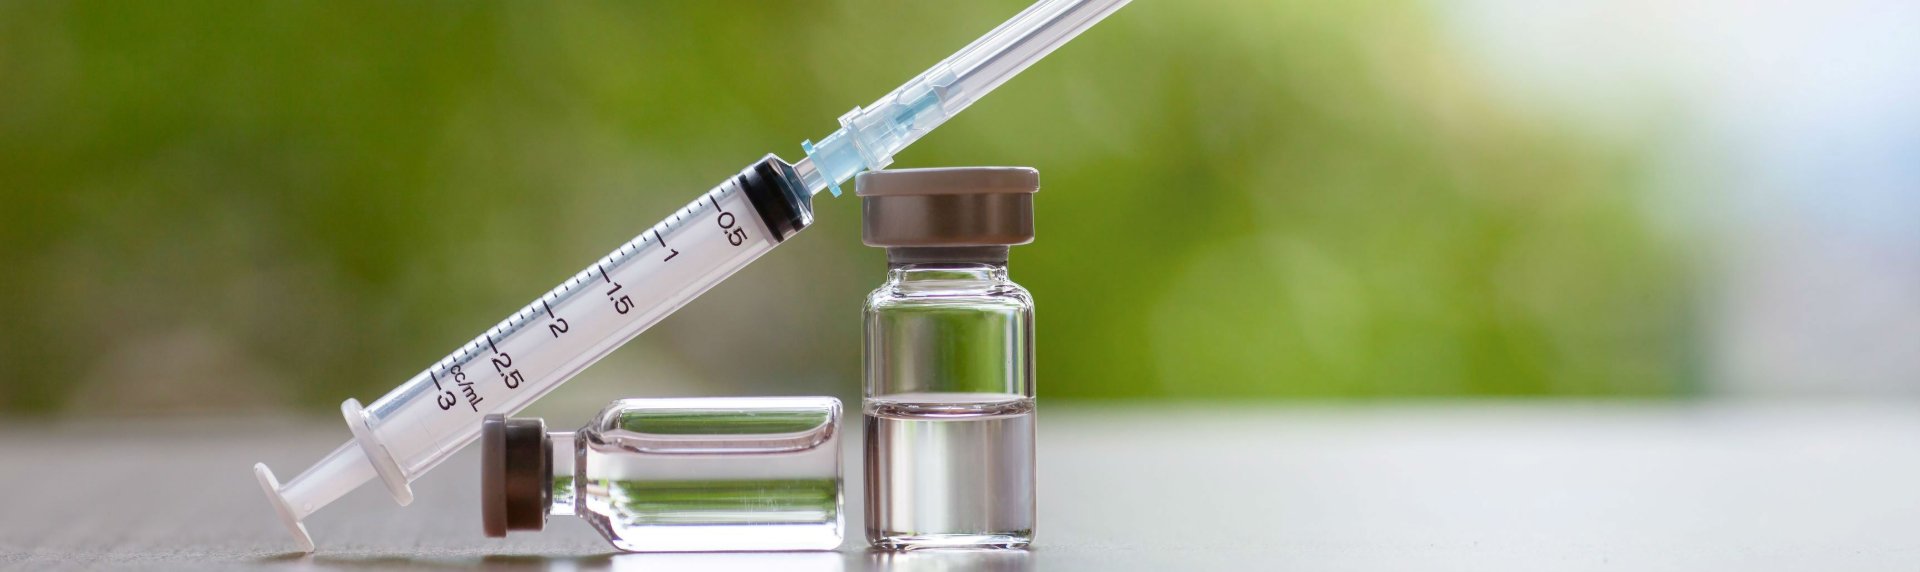 Vaccine Vial and Syringe